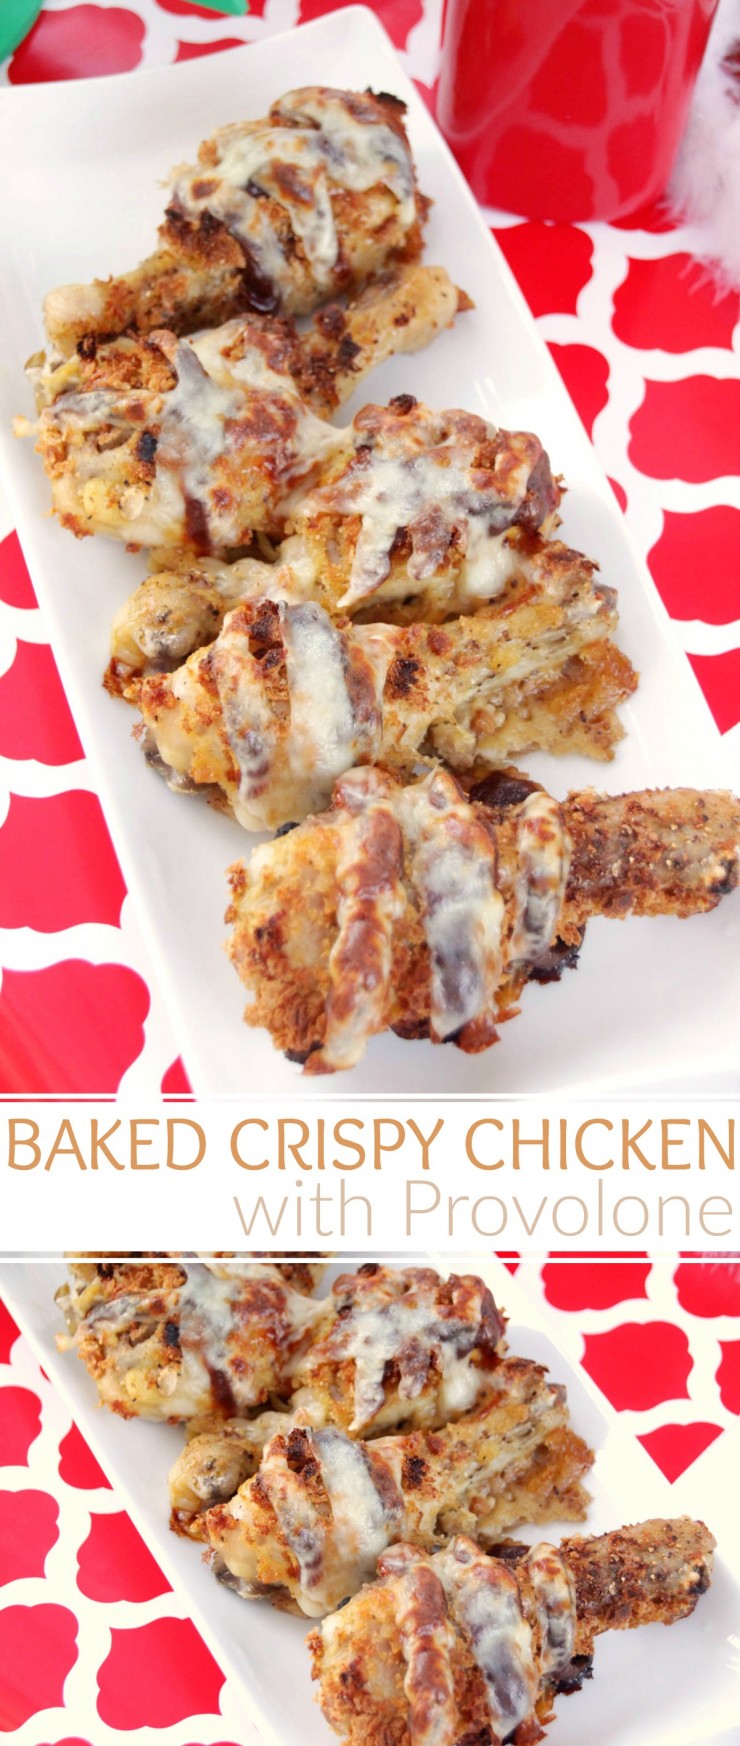 Baked Crispy Chicken with Provolone